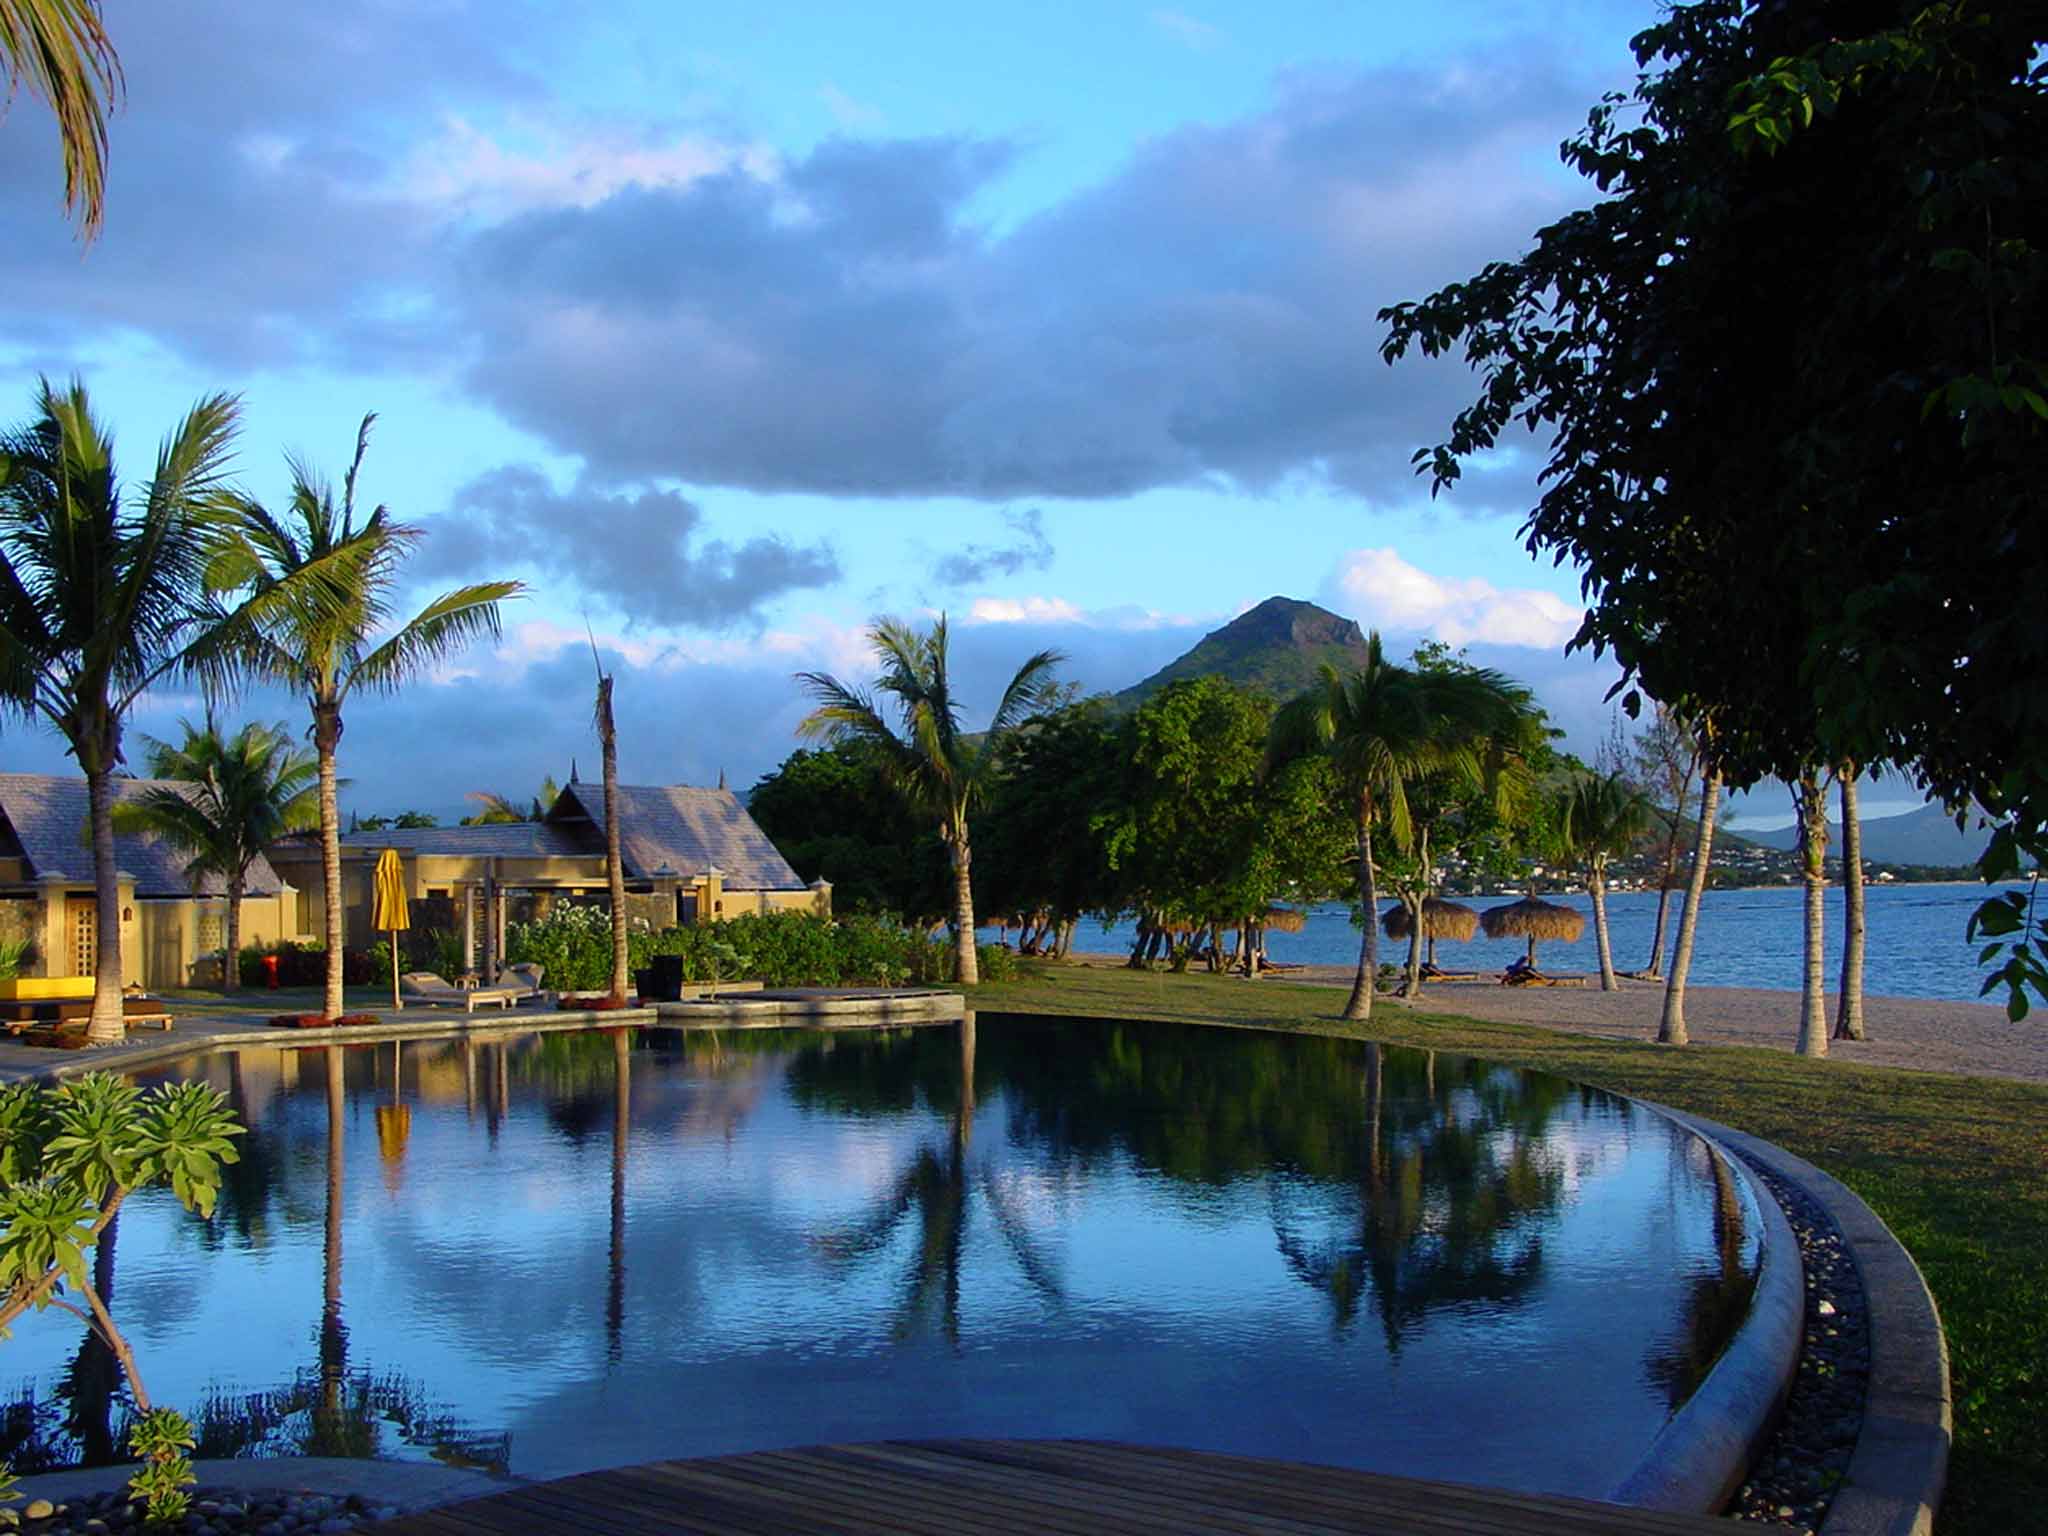 Mauritius: A fortnight is ideal for a combination of exploration and relaxation